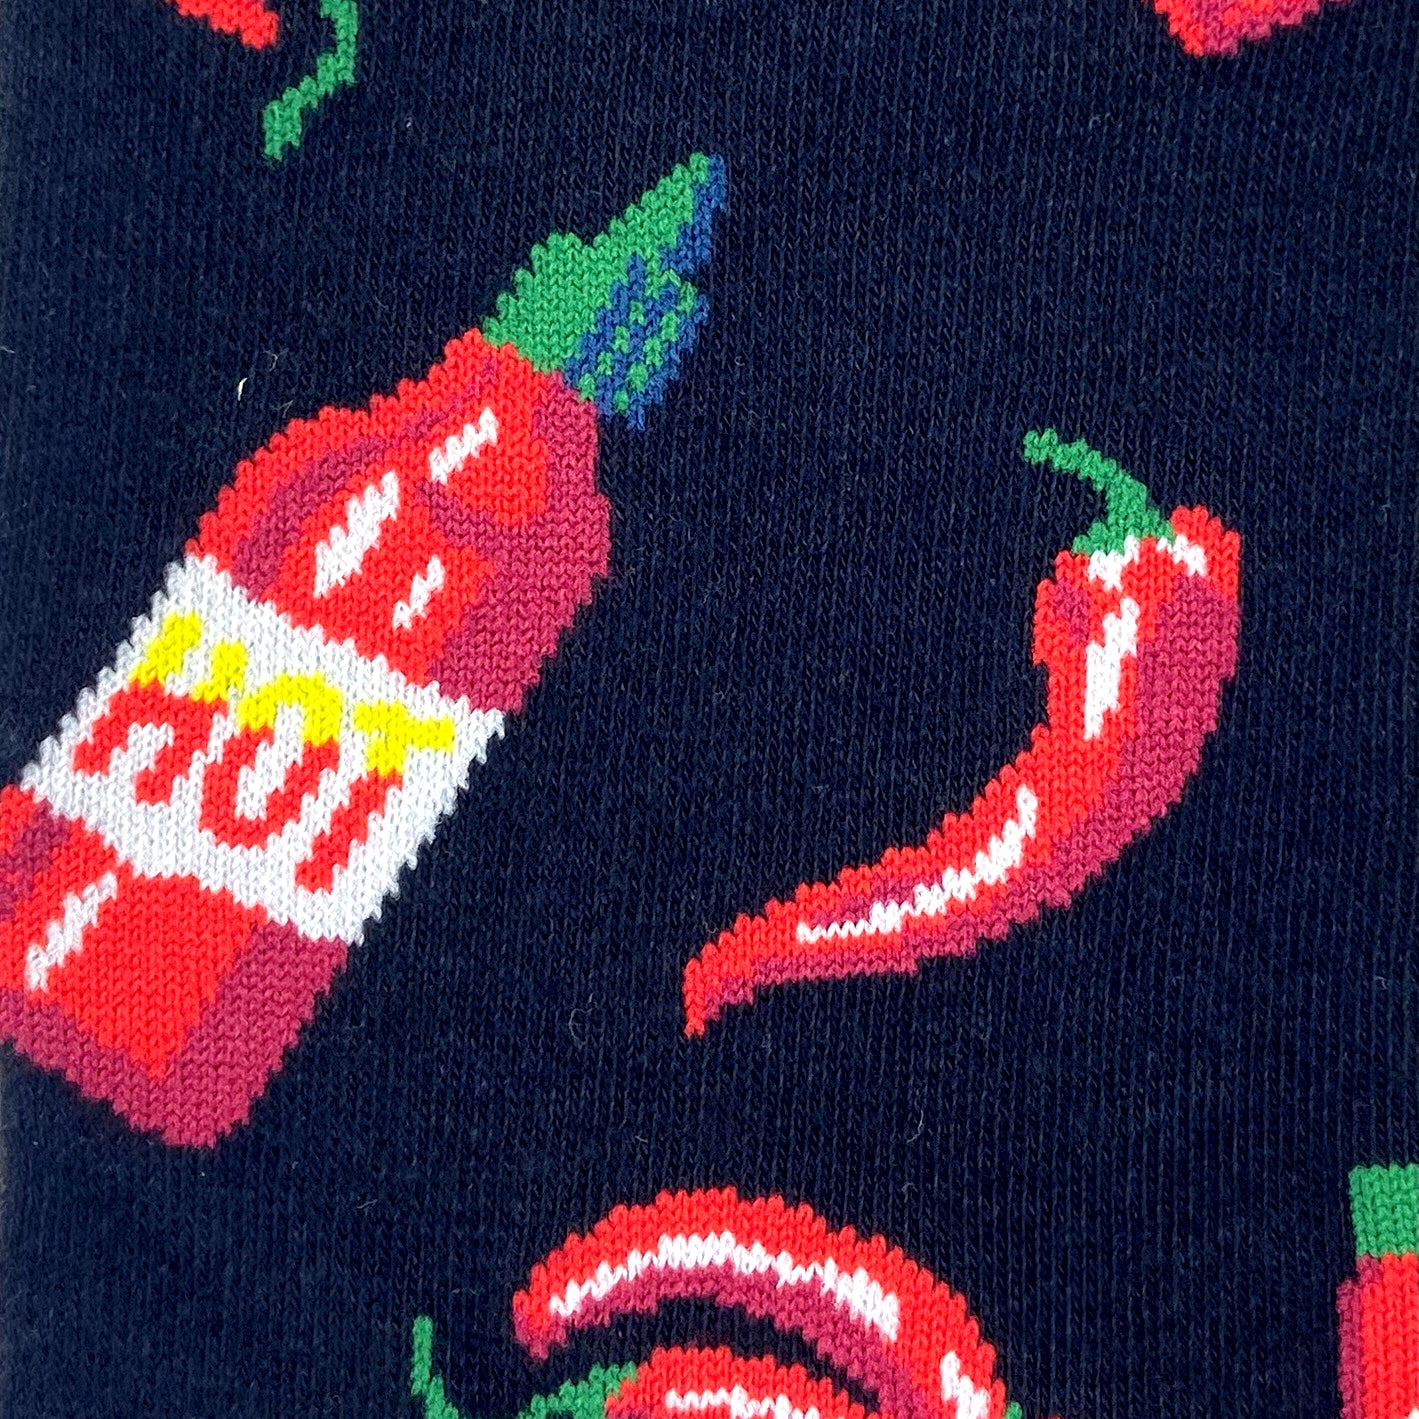 Unisex Foodie Themed Red Hot Chili Pepper Spicy Sauce Novelty Socks